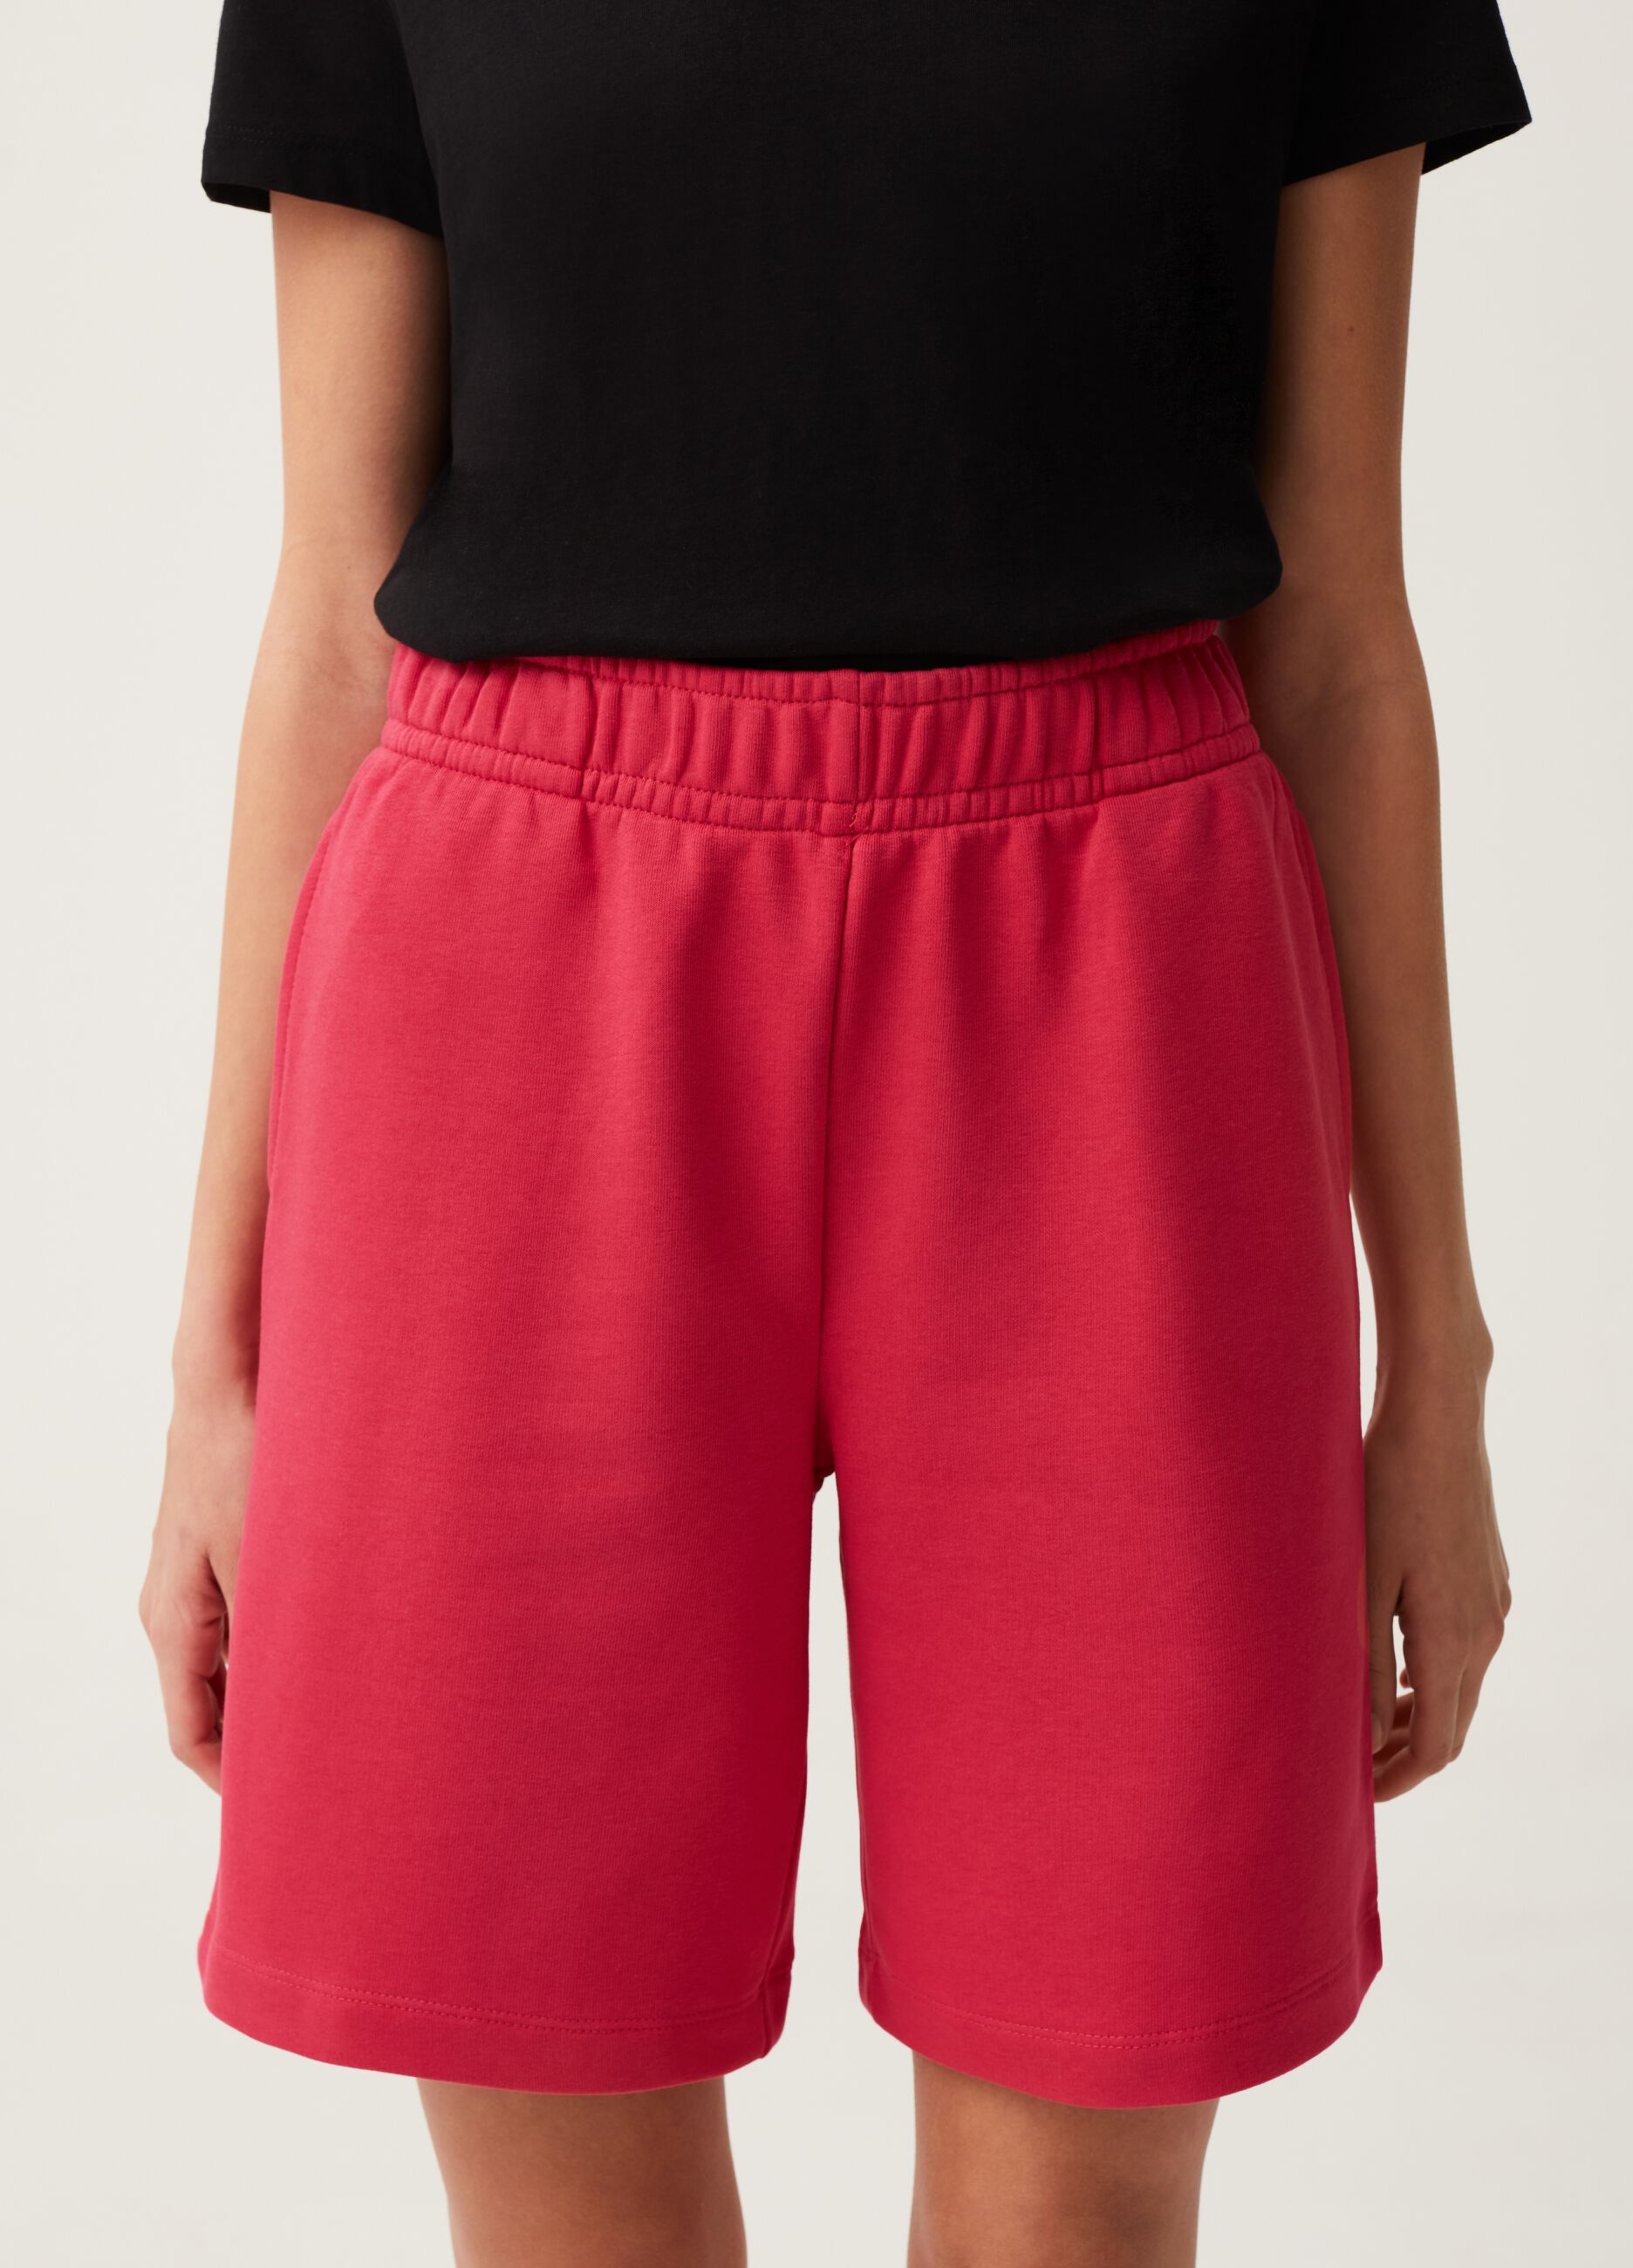 Fitness Bermuda shorts in French terry